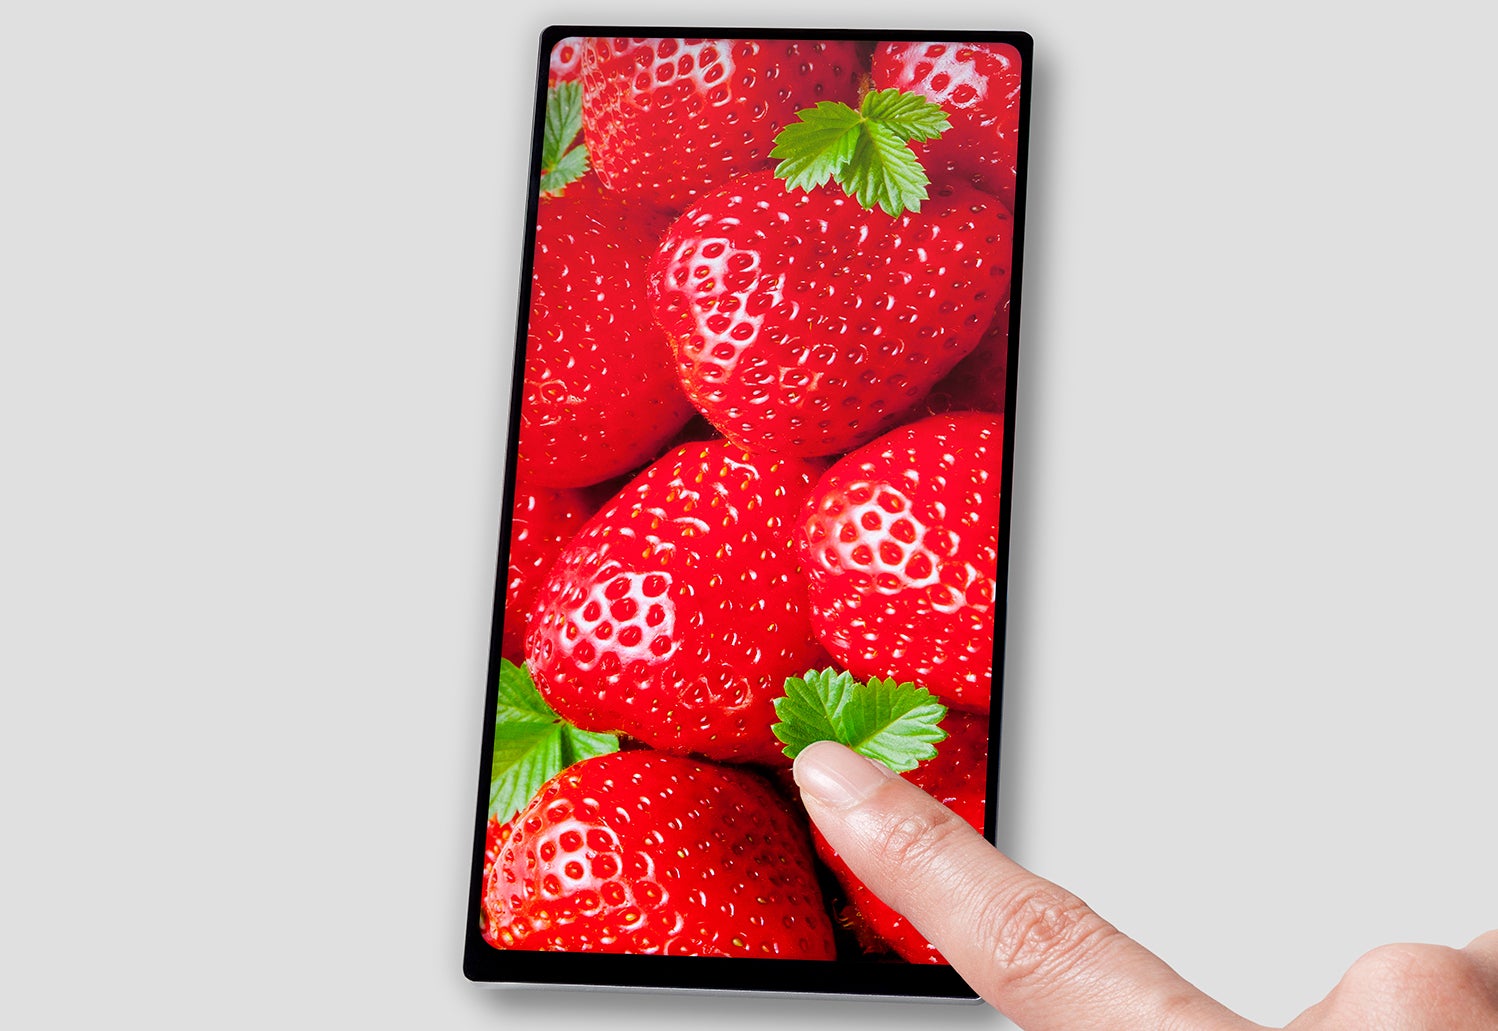 Image of JDI's Full Active LCD display - Sony rumored to announce a bezel-less flagship at IFA 2017